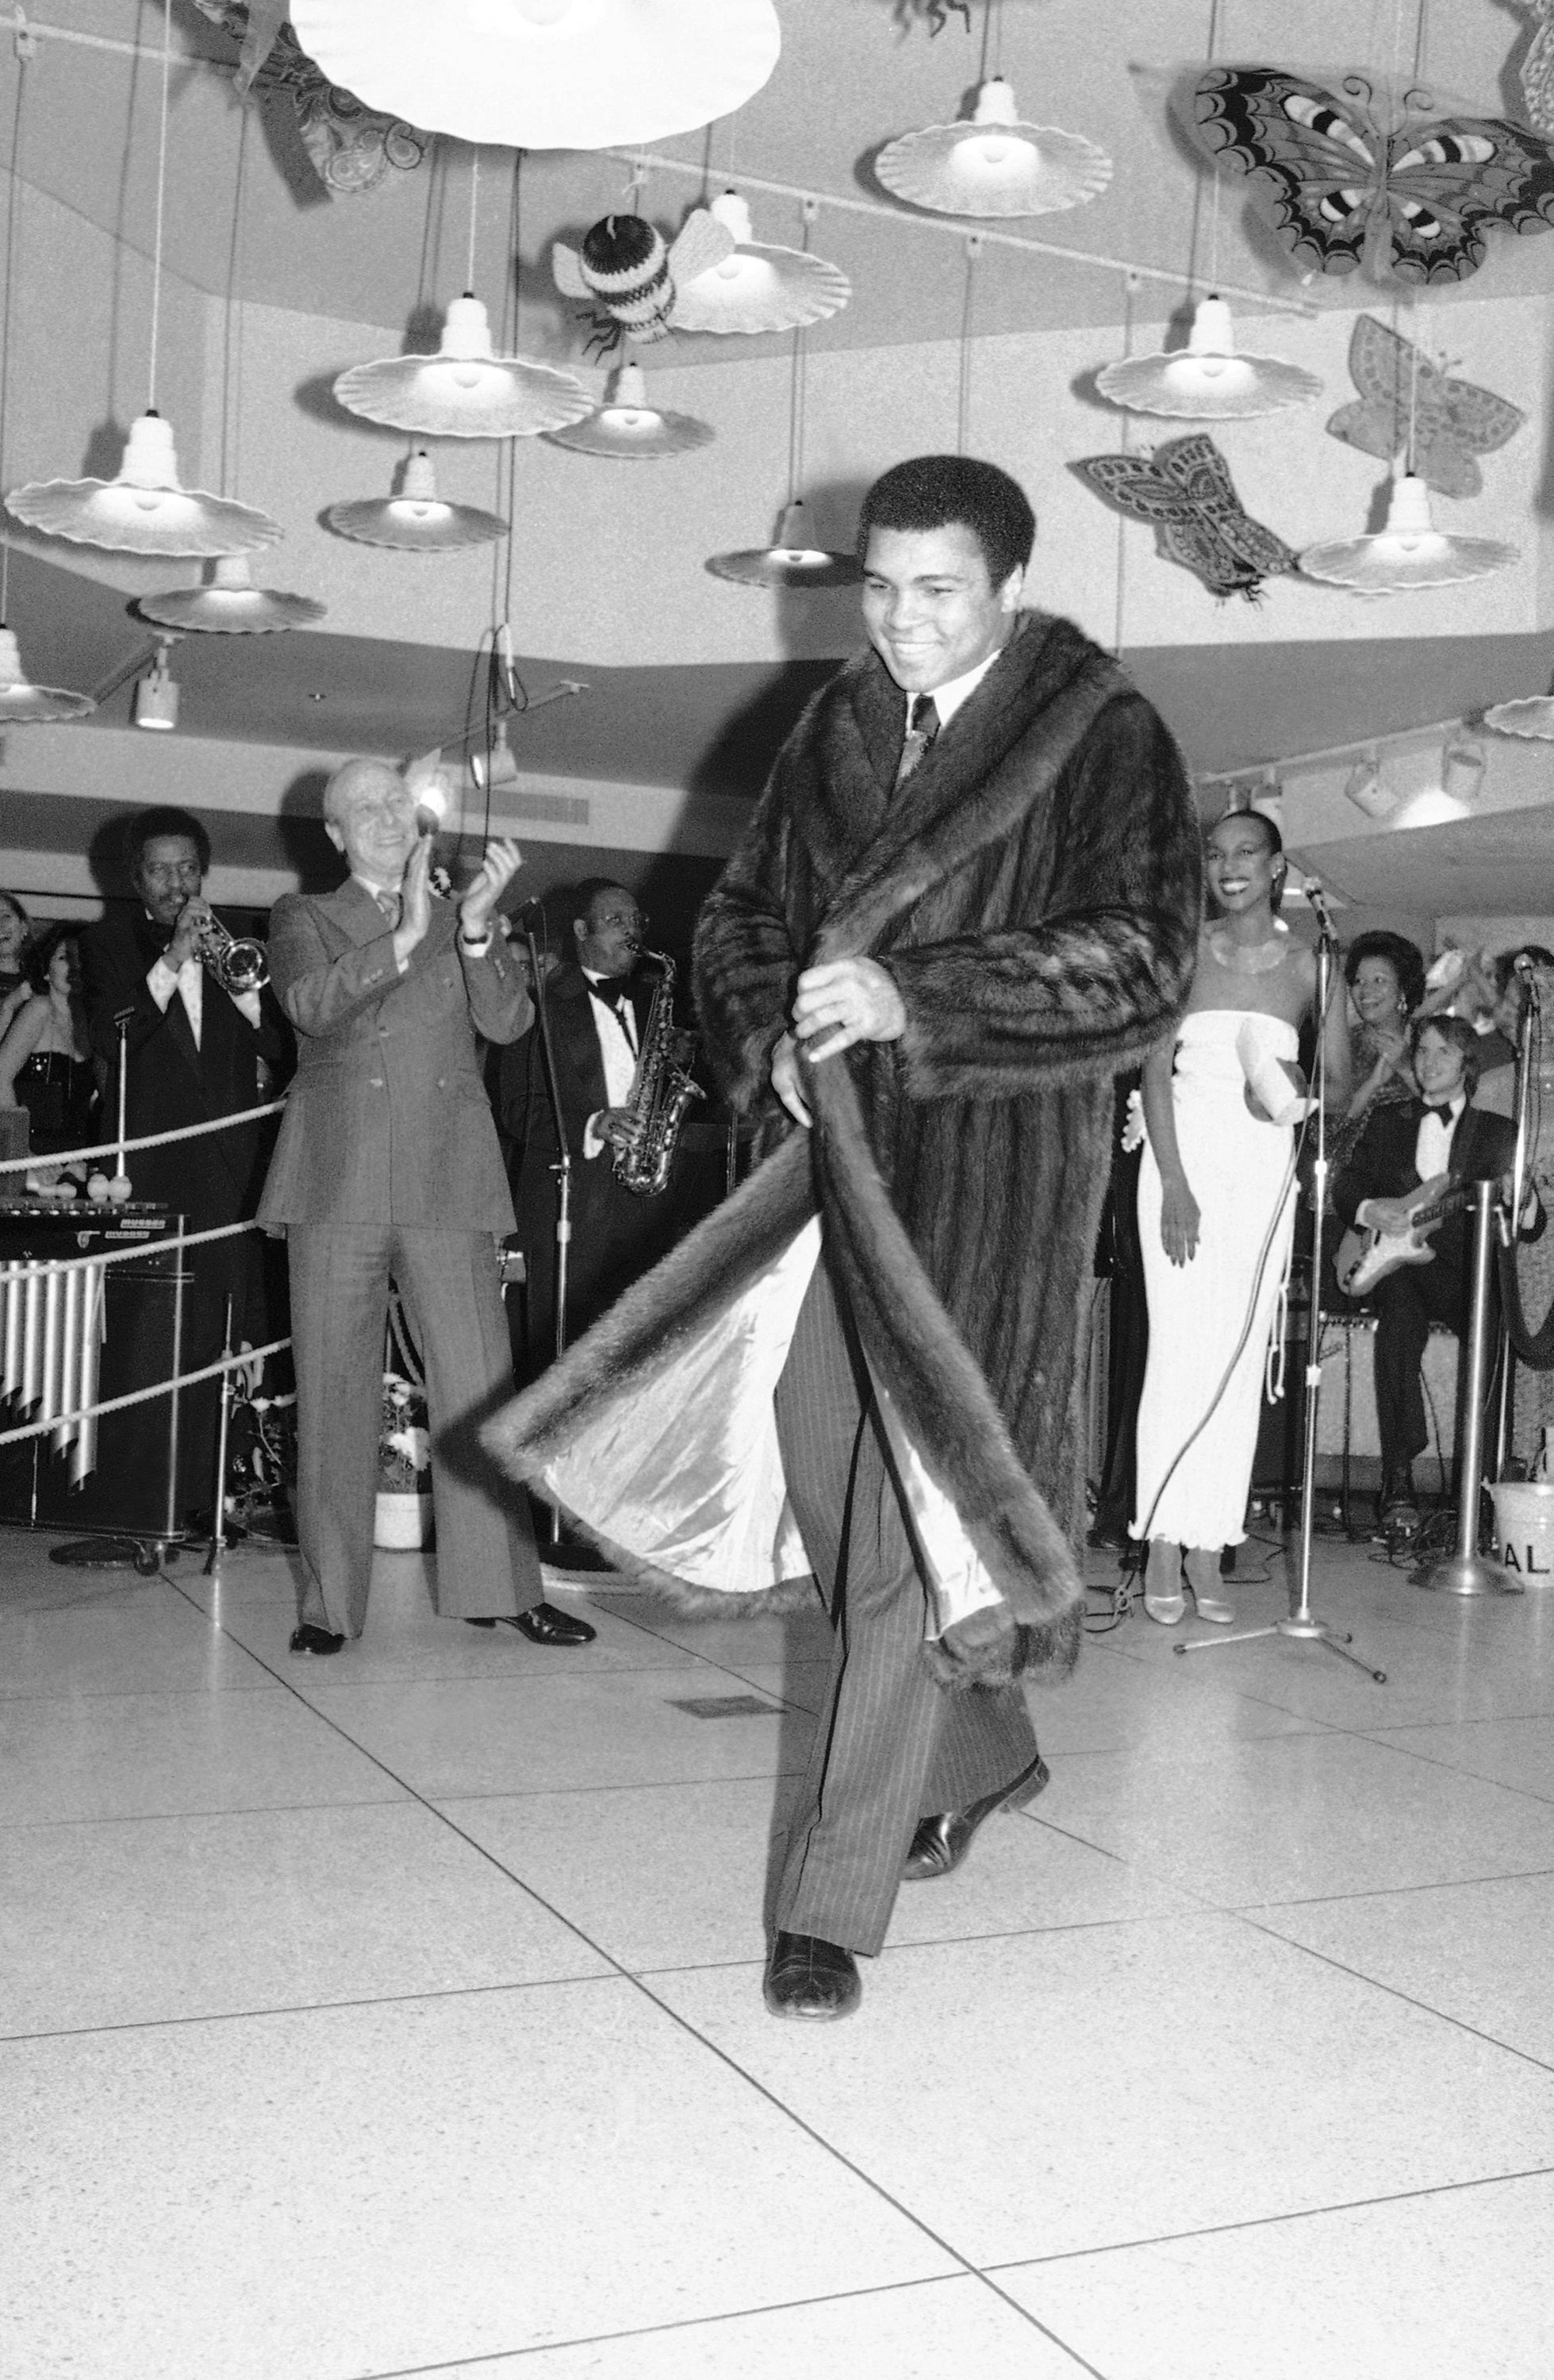  Heavyweight champ Muhammad Ali is a smiling study in sable fur, as he models full length coat during fashion show on Thursday, Dec. 8, 1977 at World Trade Center in New York. He was among the sports greats who modeled during the northside center for